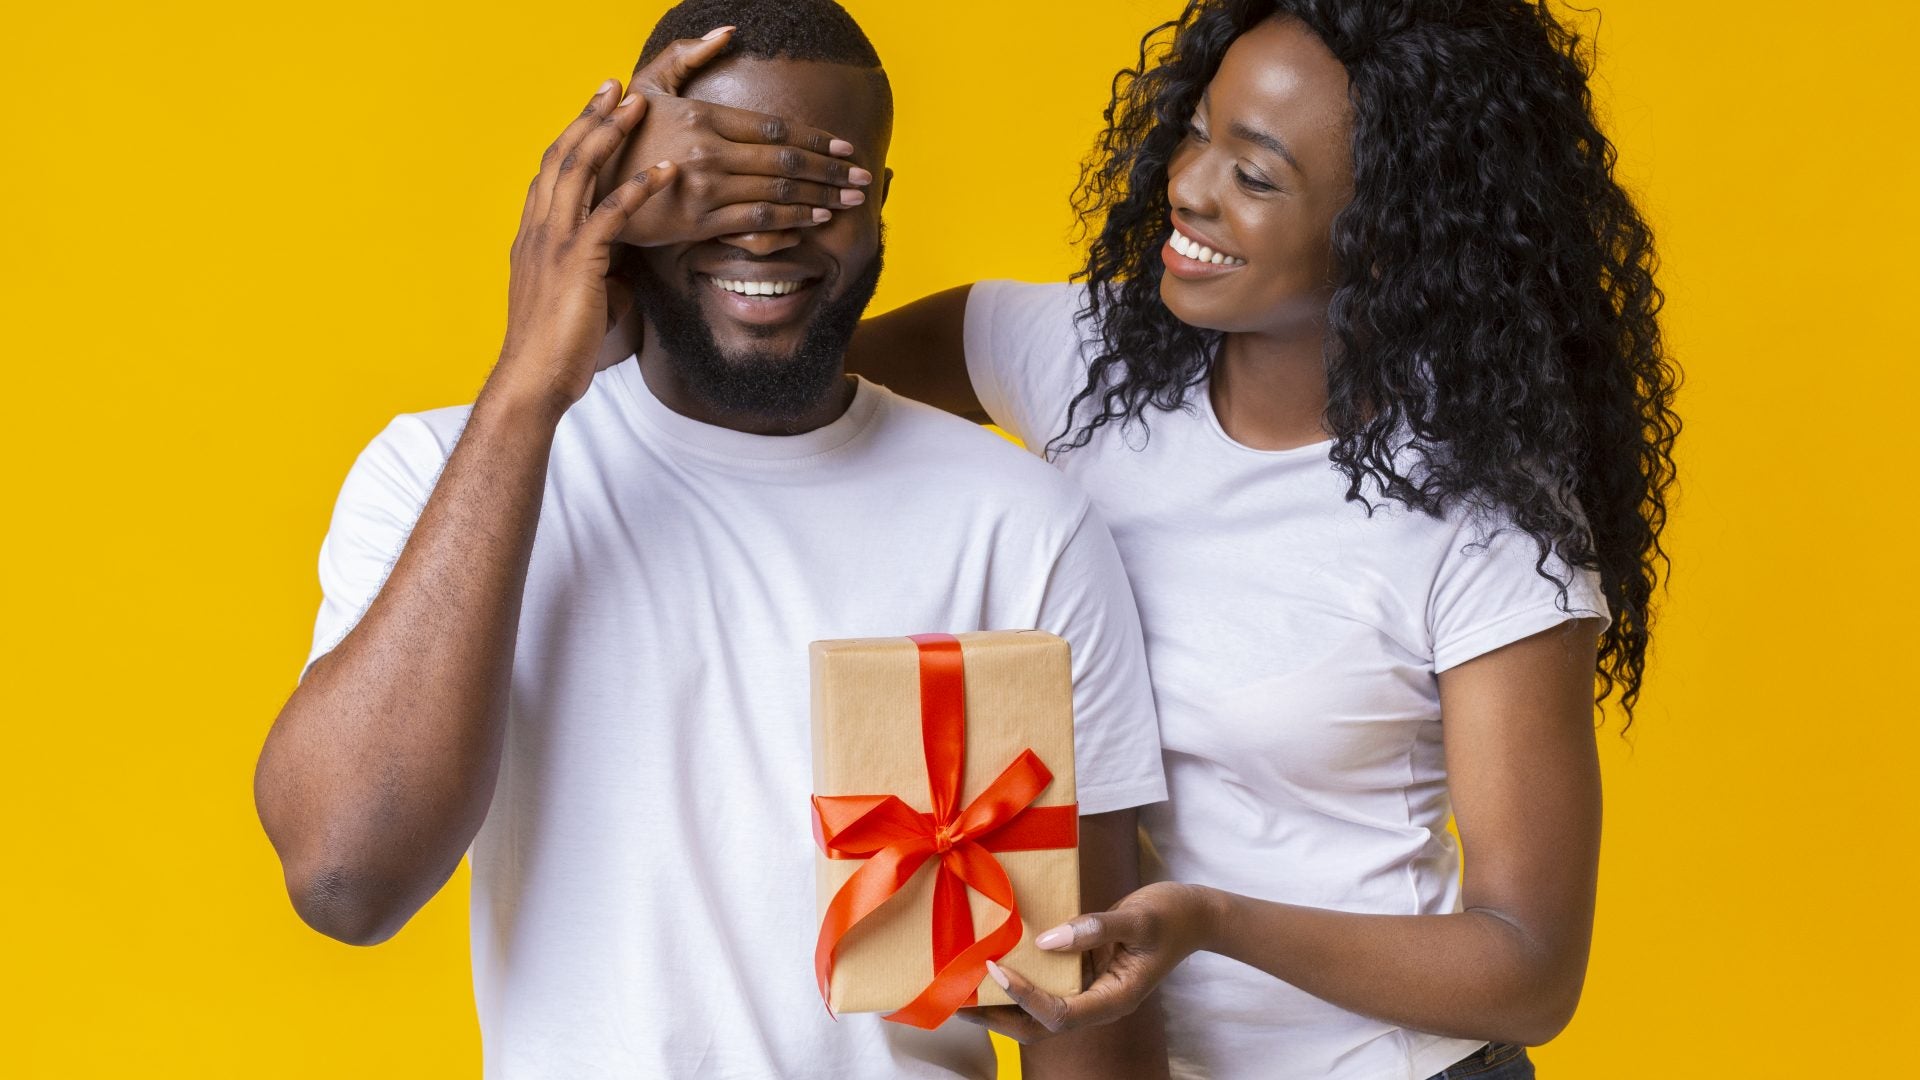 6 Smart Valentine's Day Gifts The Man In Your Life Will Fall In Love With